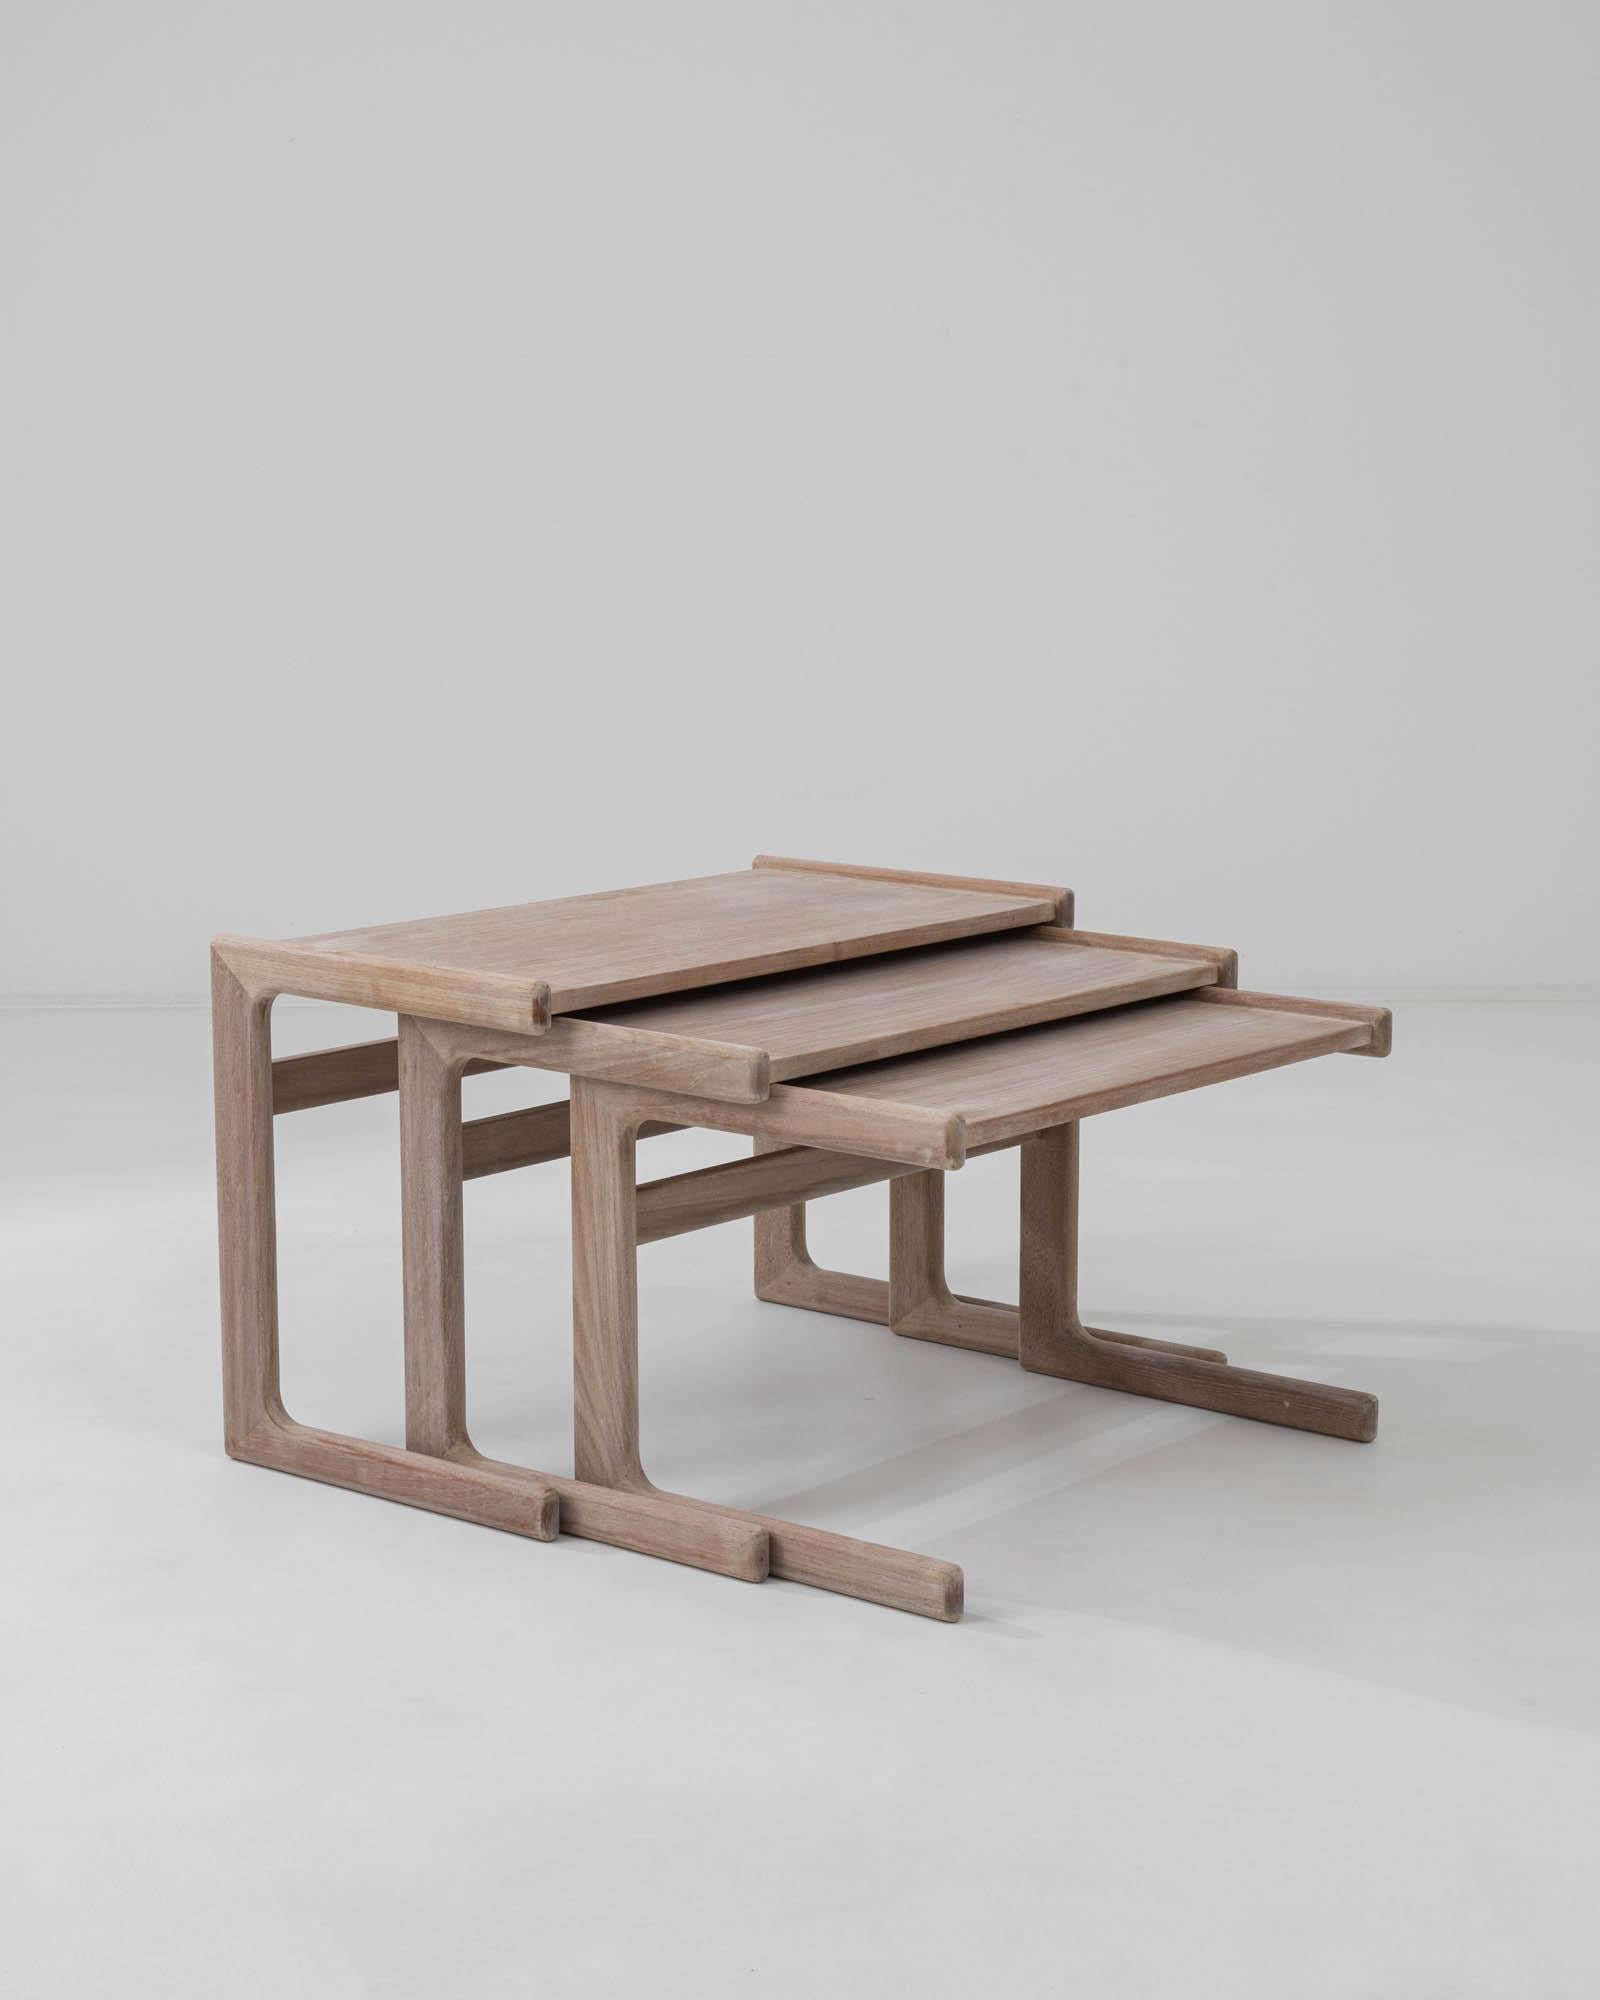 This set of teak nesting tables was designed in Denmark in the 1970s. Dynamically composed with traditional materials and quality construction, the design bears the stamp of Scandinavian Modernism. Slender, linear table legs support a tray-like